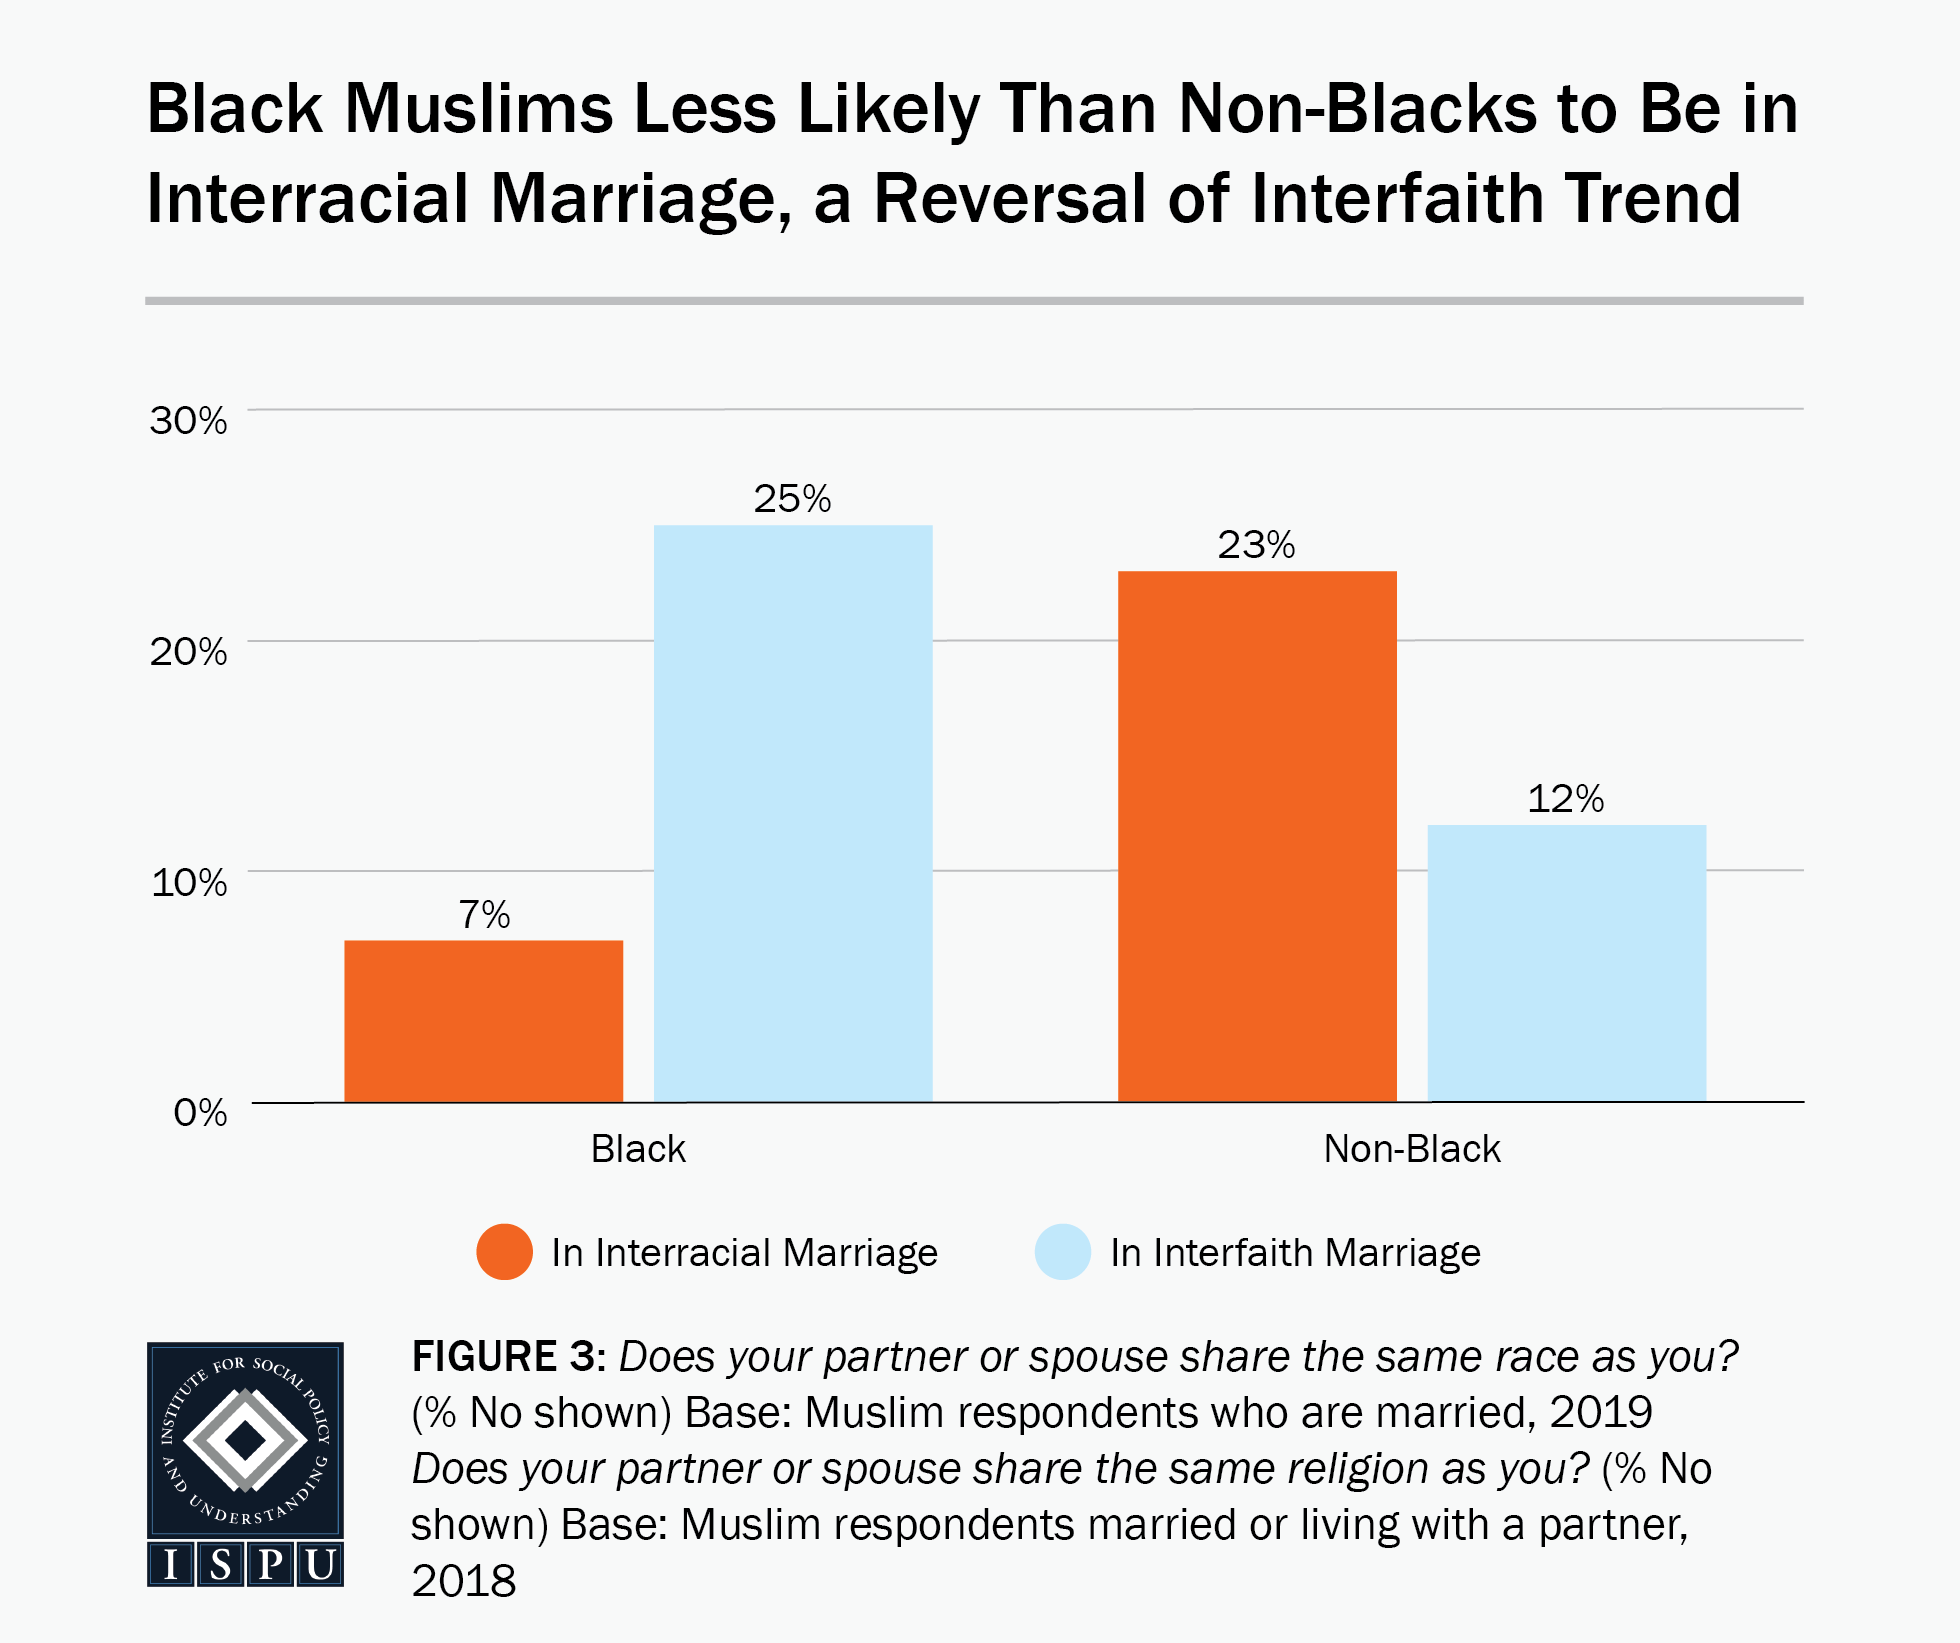 Figure 3: A bar graph showing that Black Muslims (7%) are less likely than non-Black Muslims (23%) to be in an interracial marriage, a reversal of the interfaith trend